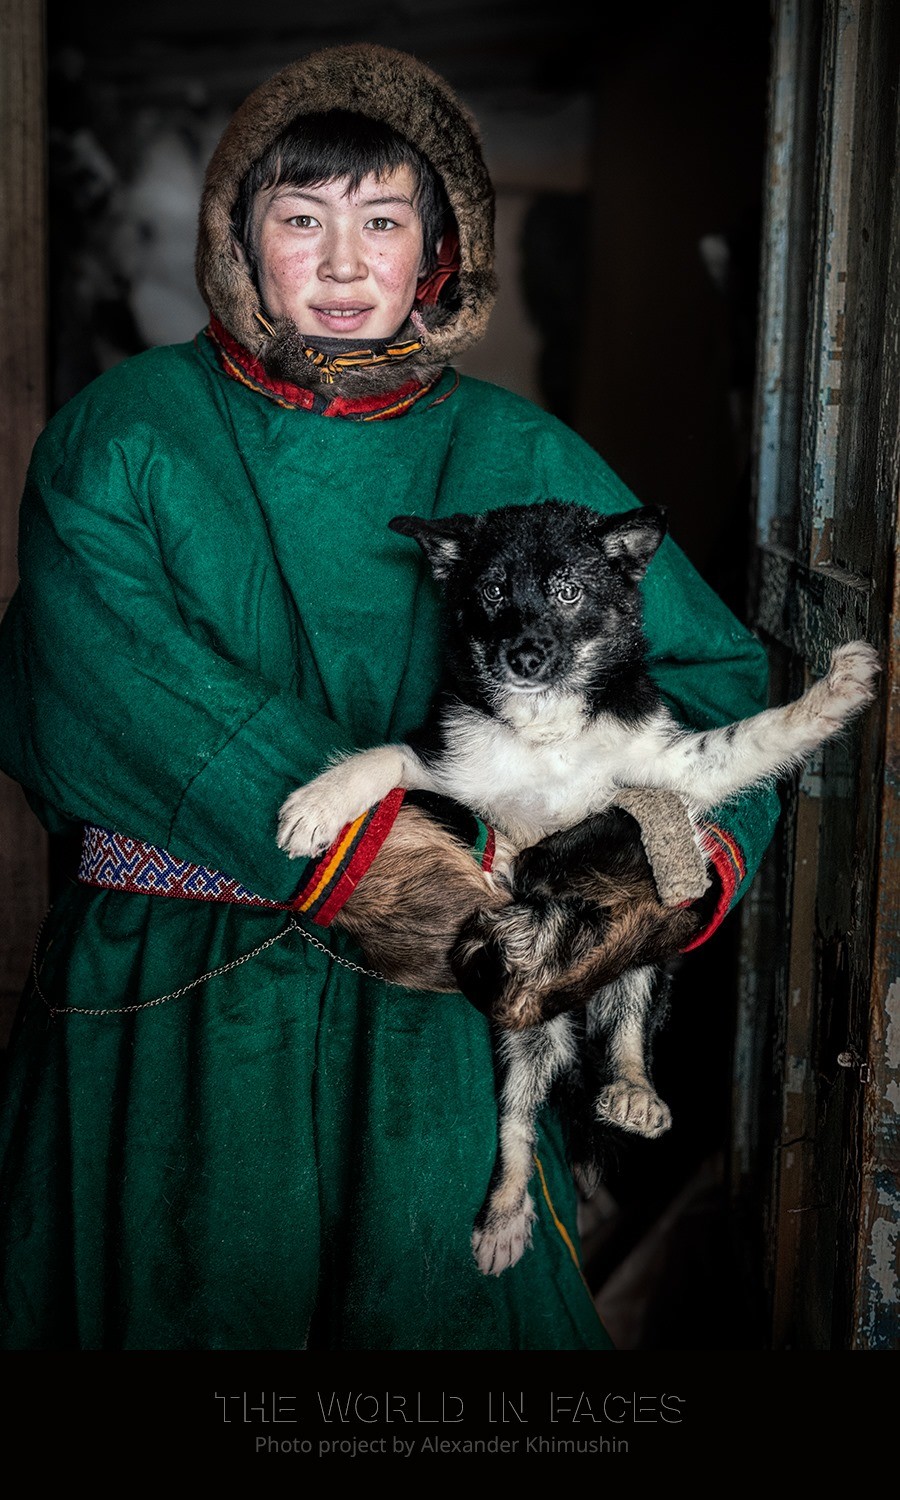 A young Nenets man with a dog.